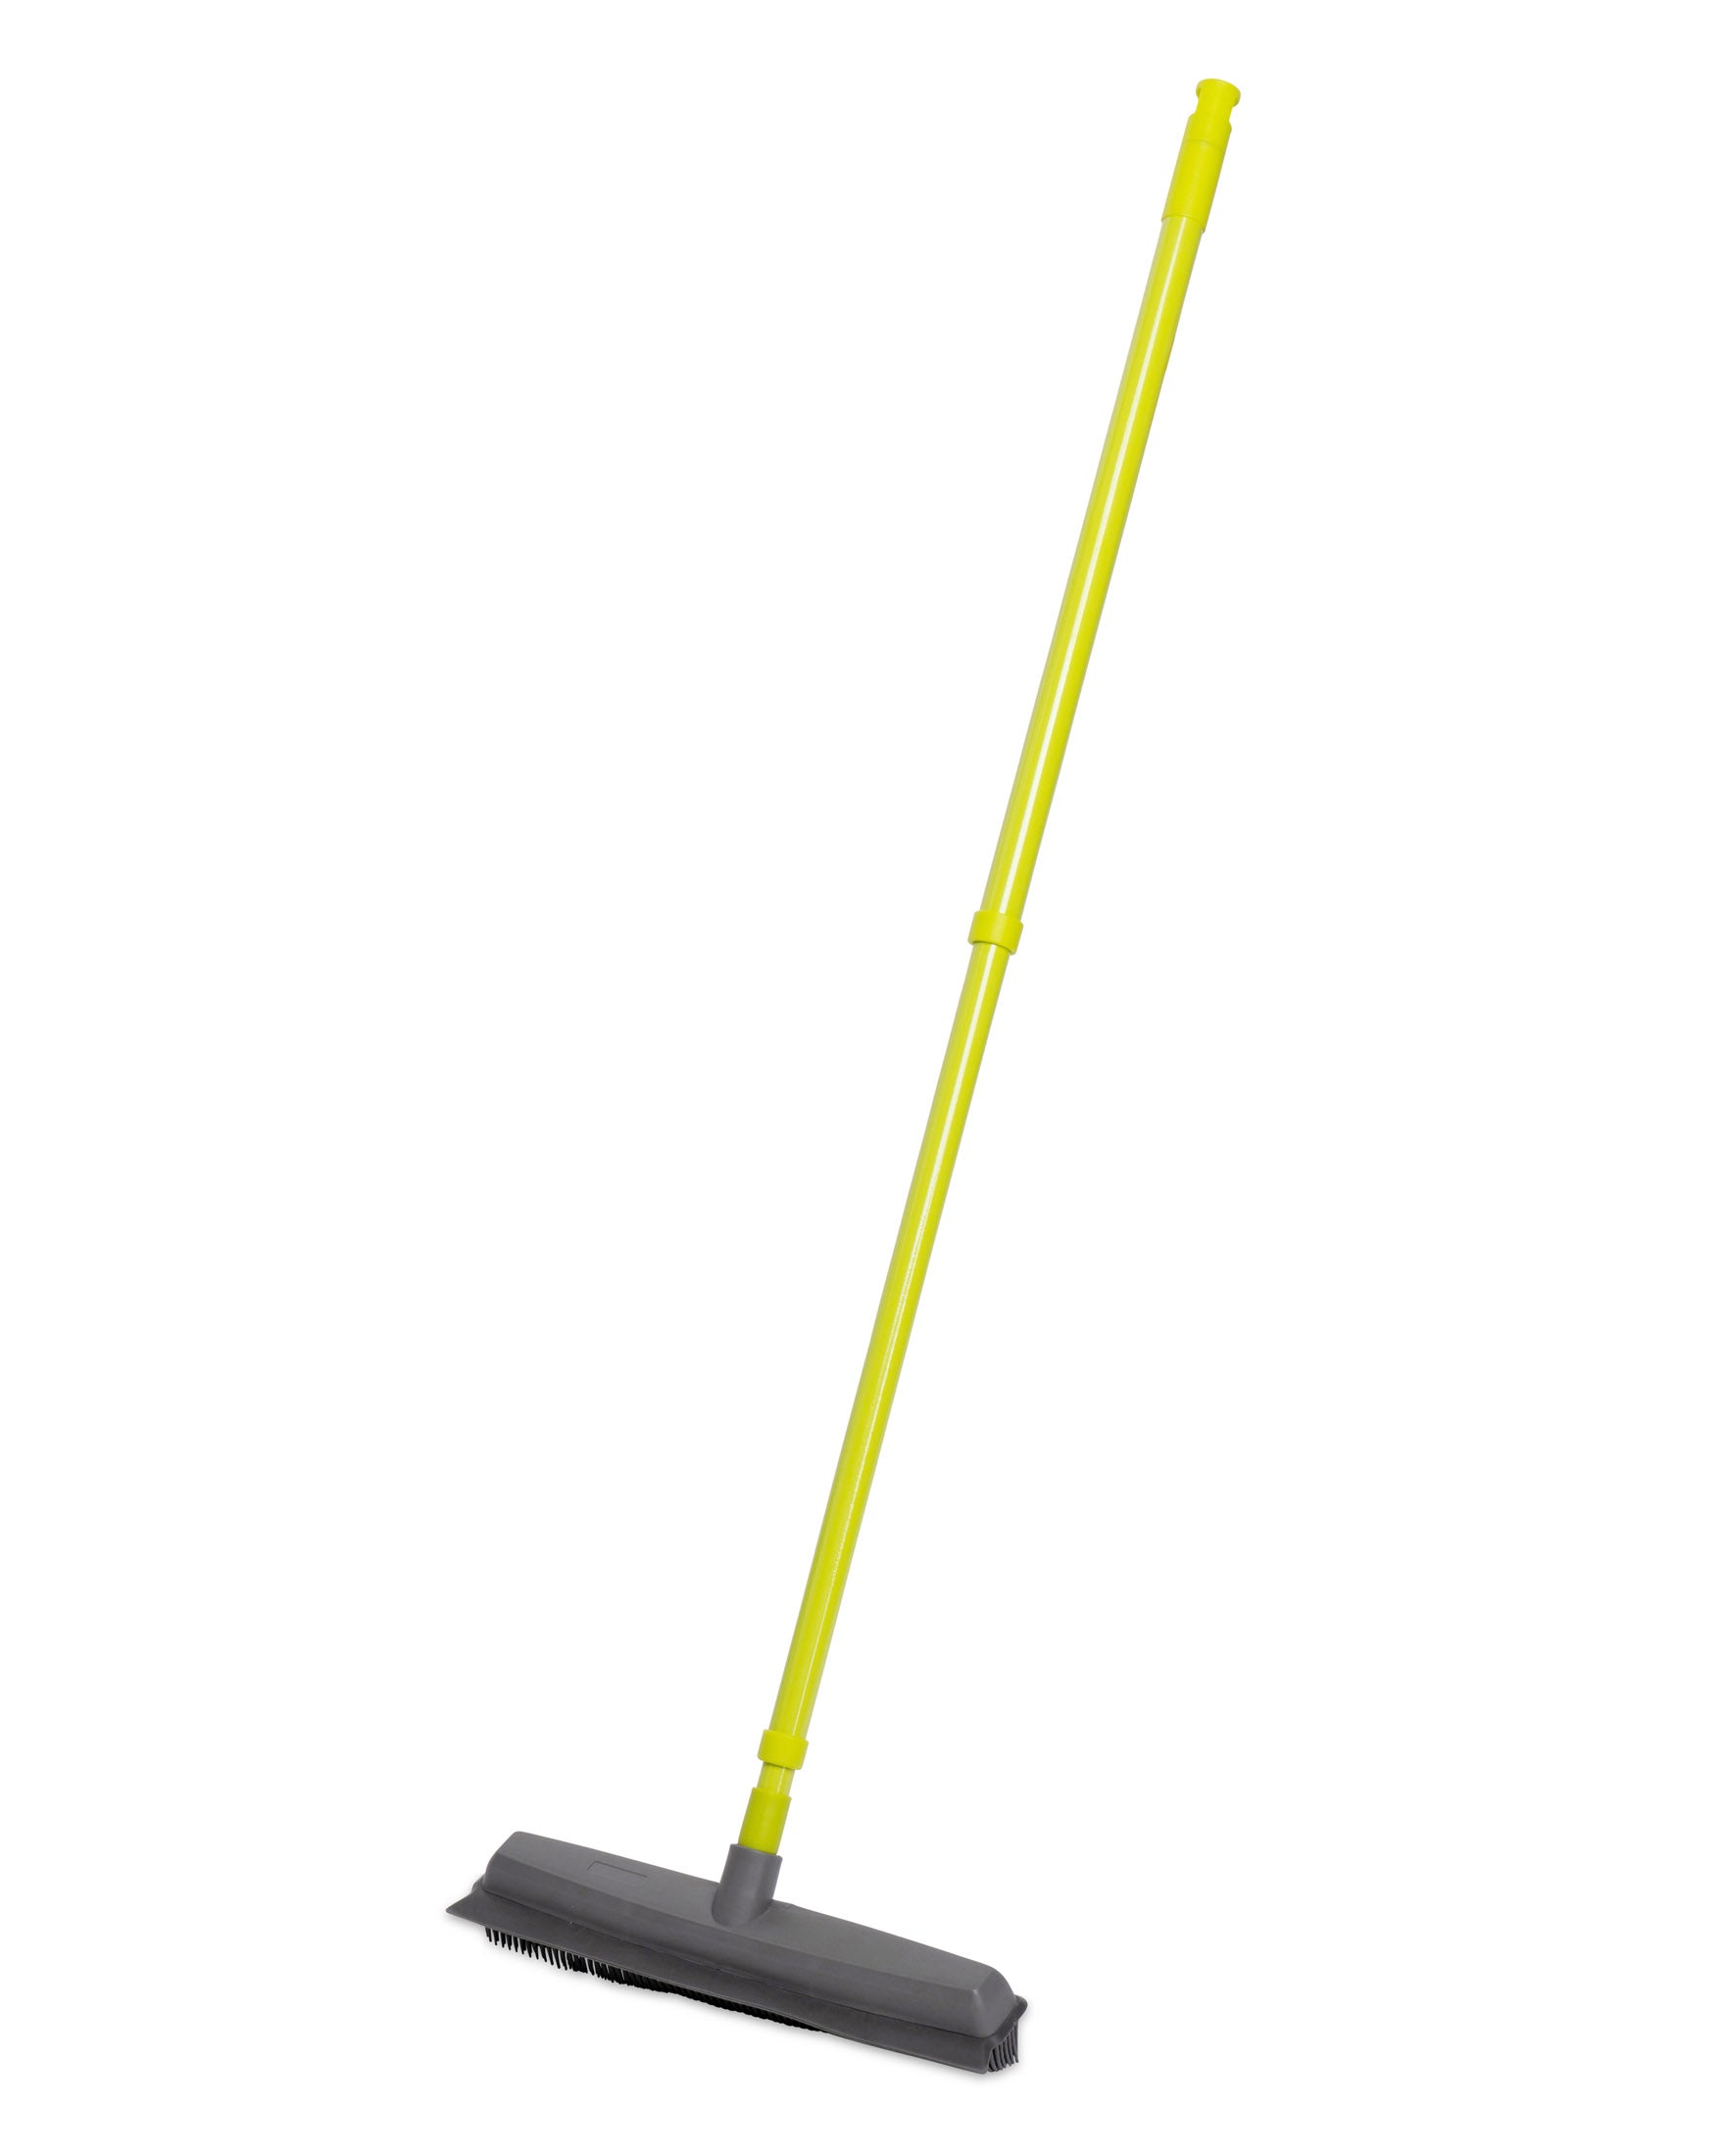 Leifheit Classic Foam Broom for Click System Handles, Width 34 cm, Useful for Allergy Suffers As Dust Is Not Whirled Up, No Dust Cloud